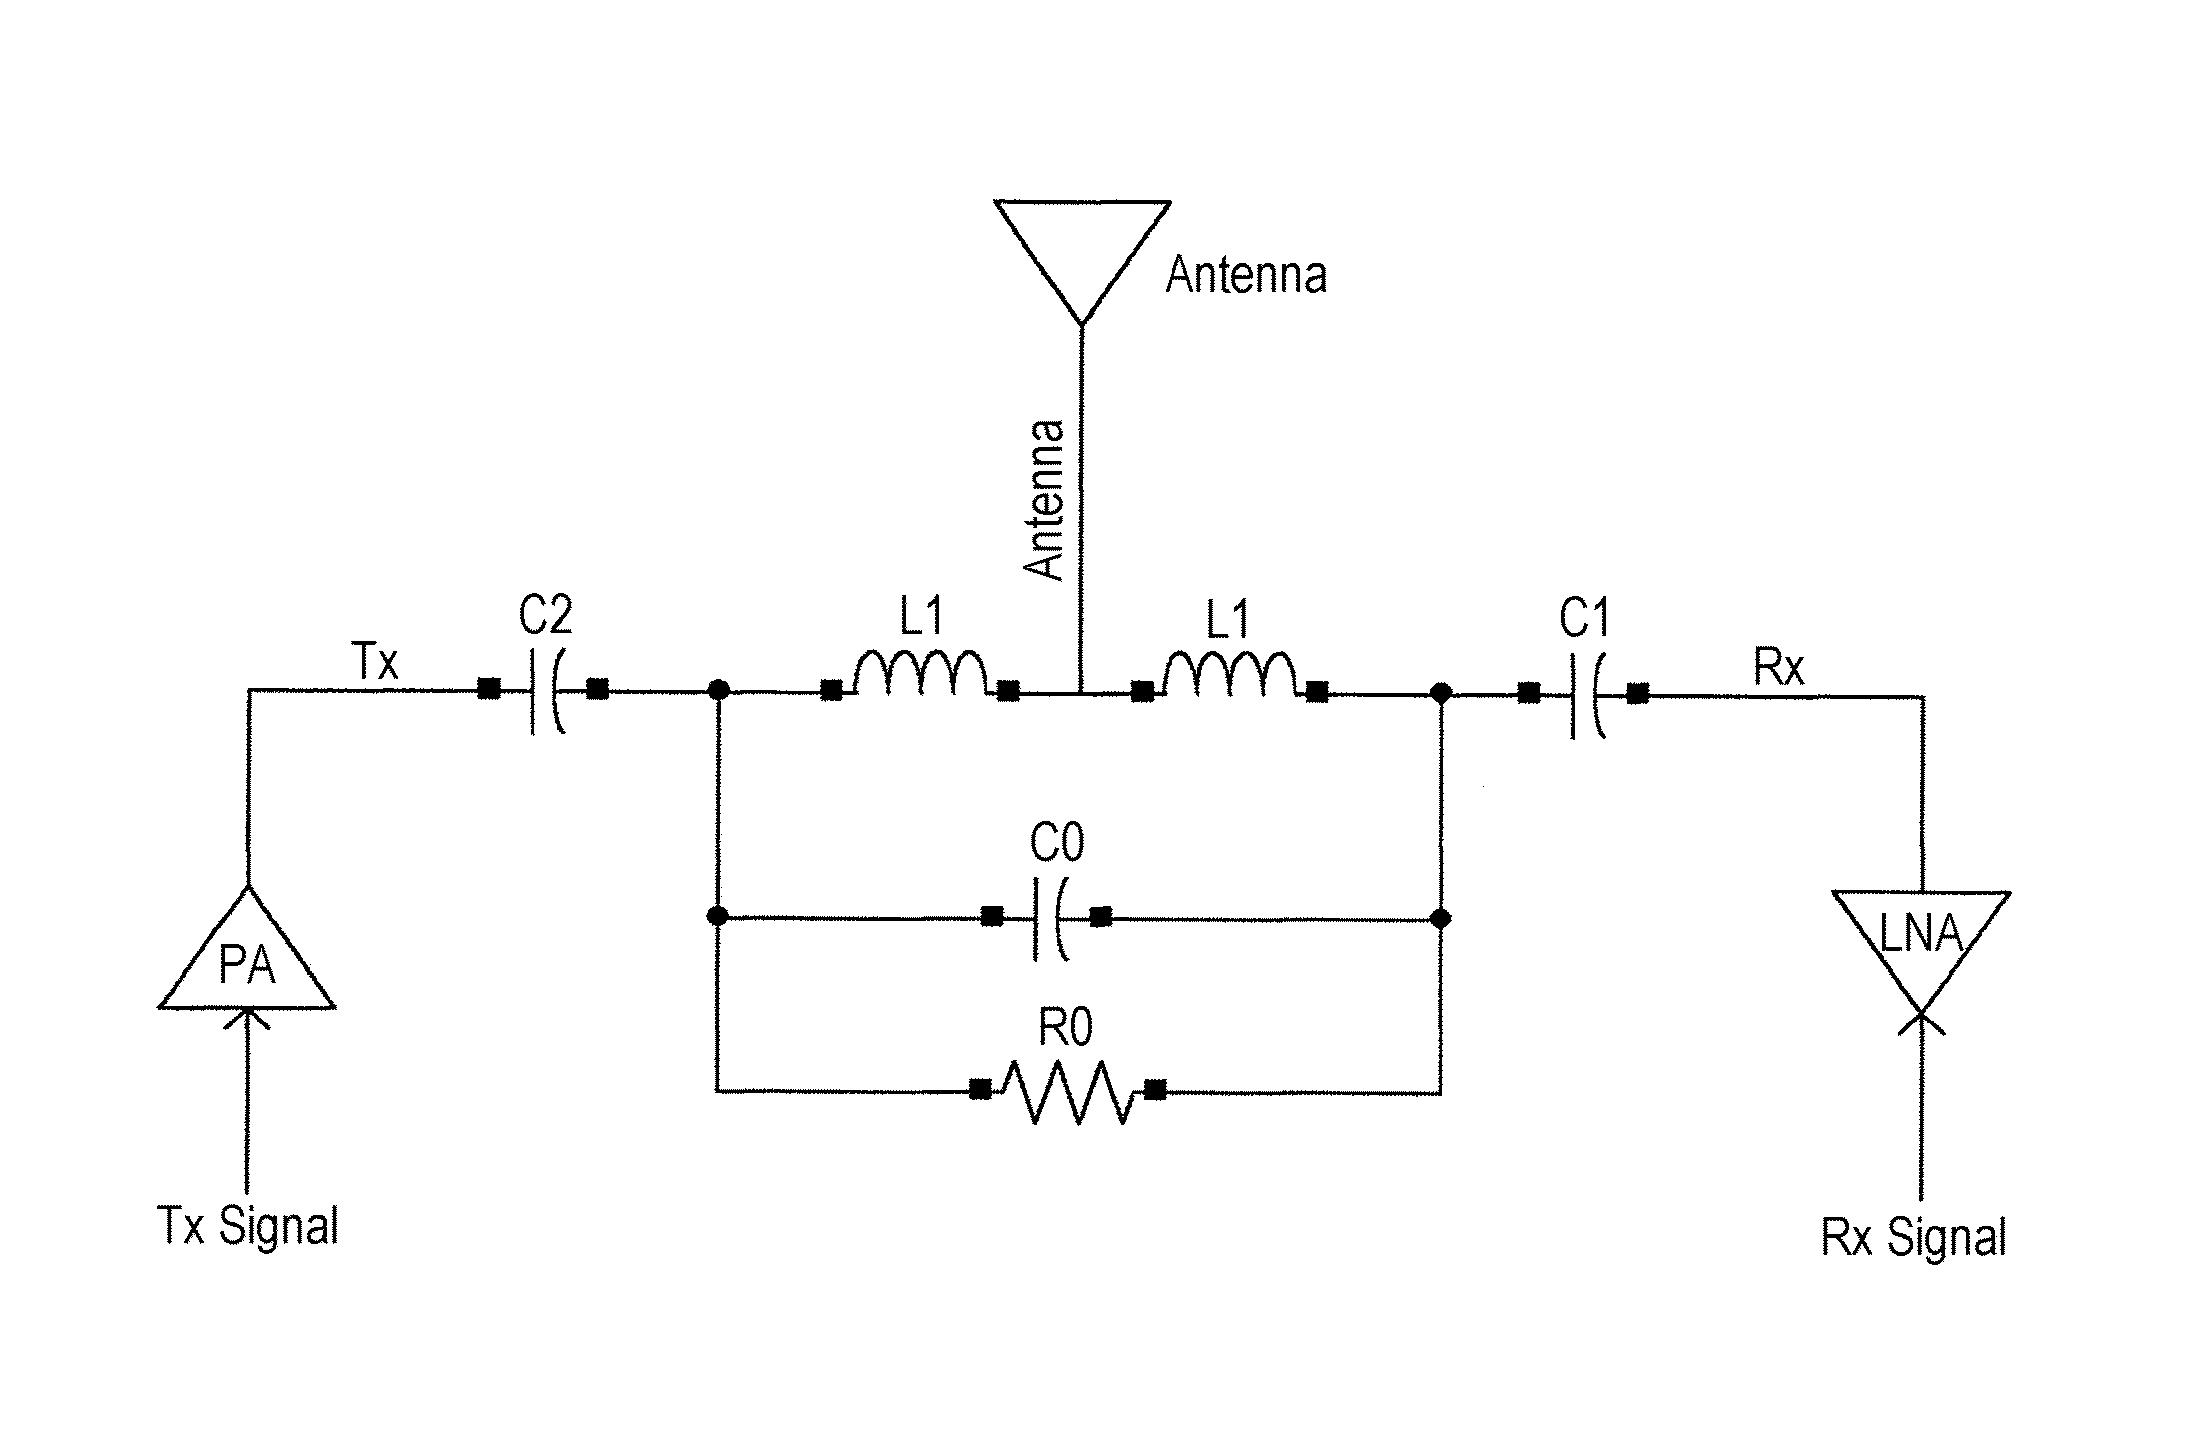 Full duplex system with self-interference cancellation